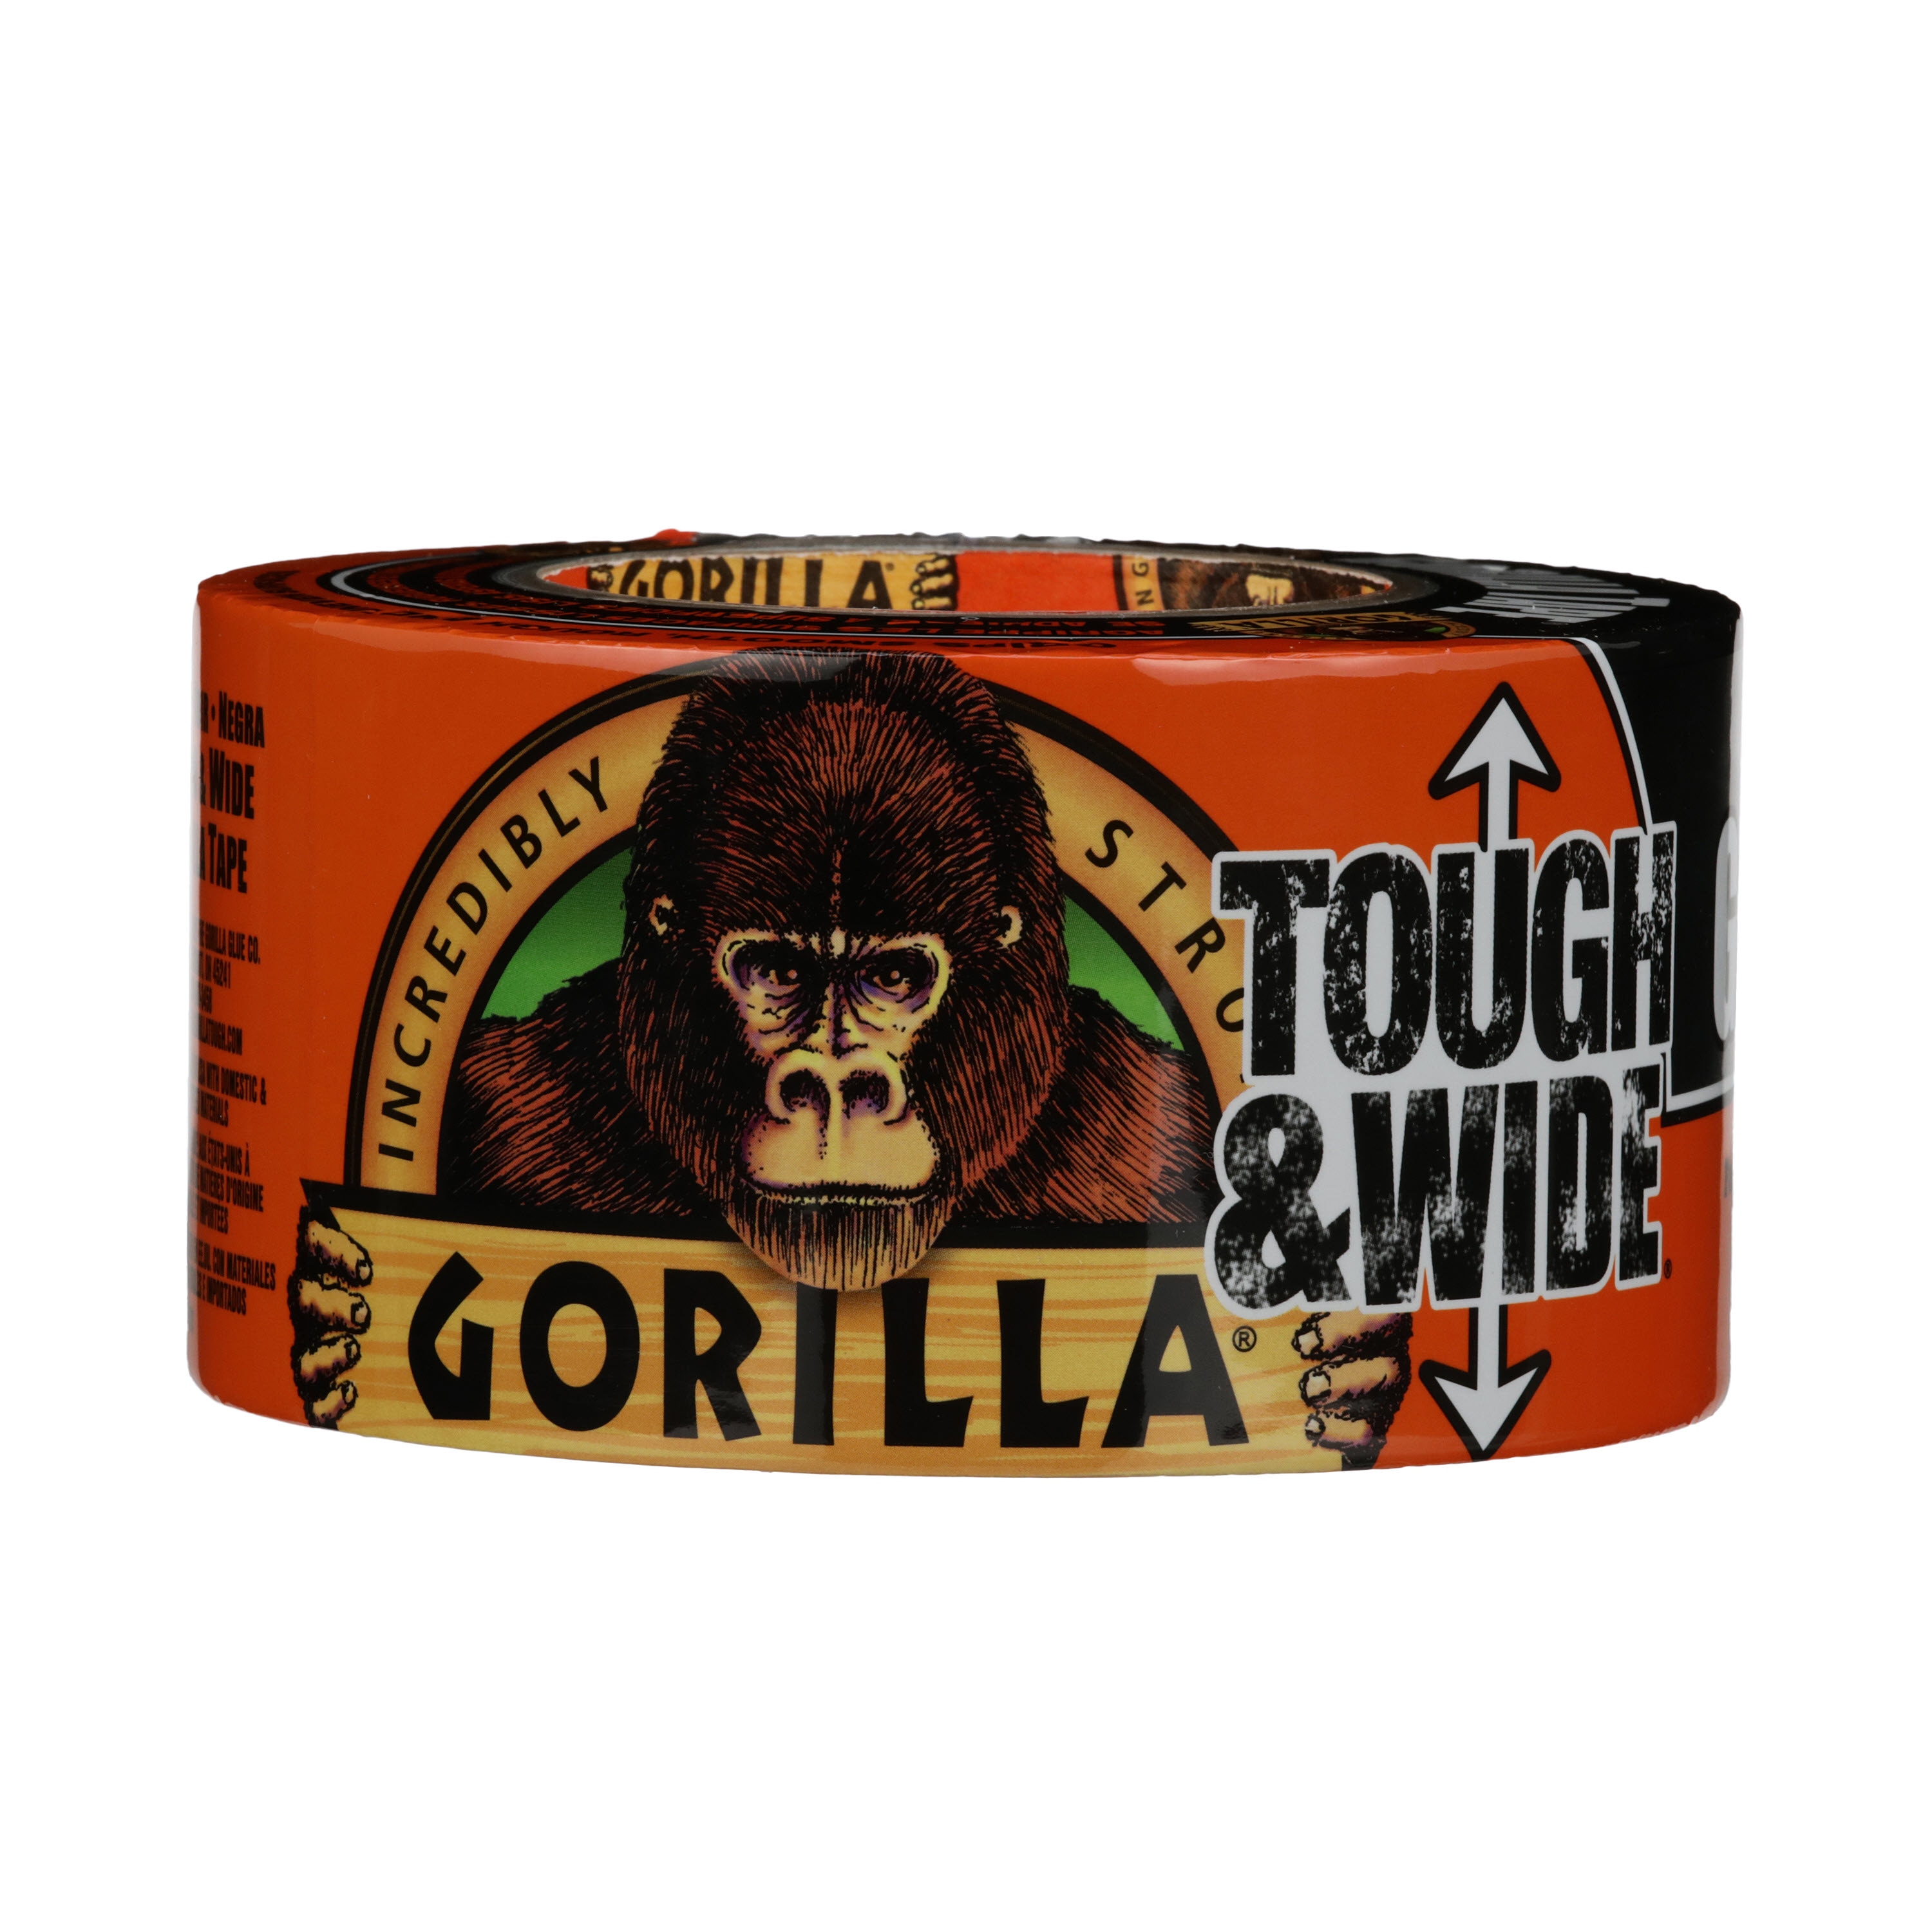 Gorilla 6003001 Tough & Wide  Duct Tape NEW 2.88-Inch x 30-Yards 